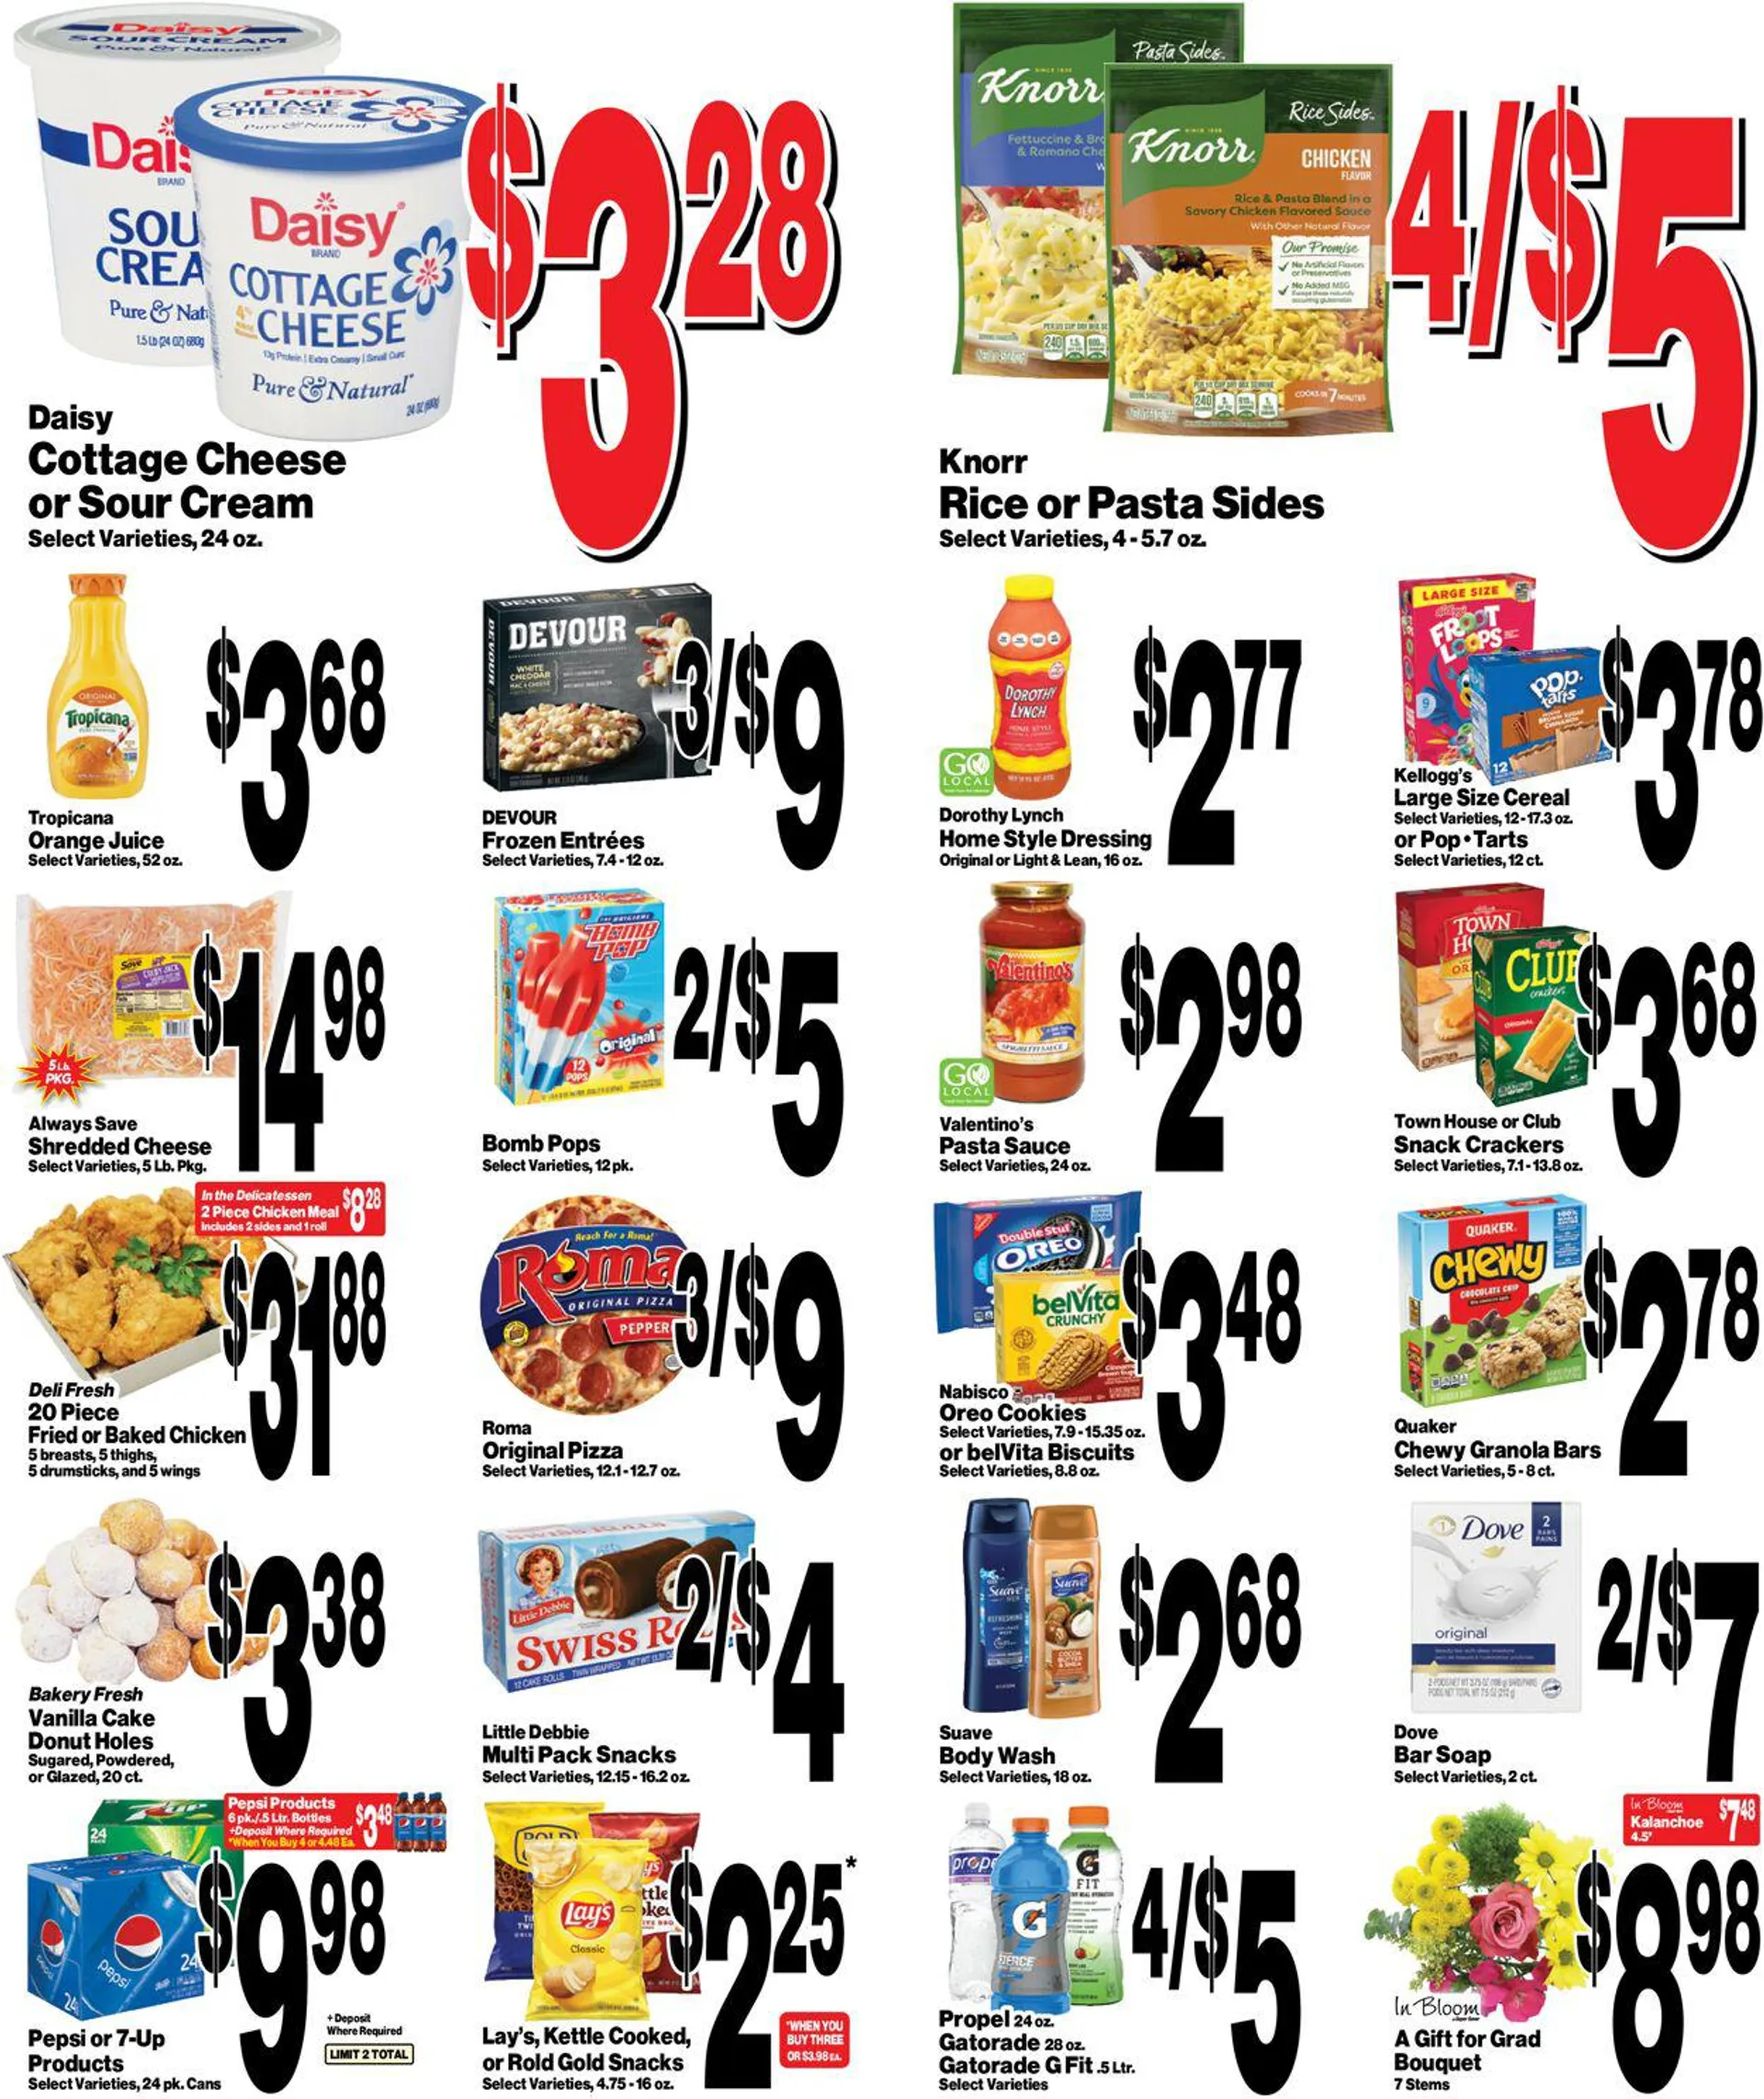 Super Saver Current weekly ad - 3